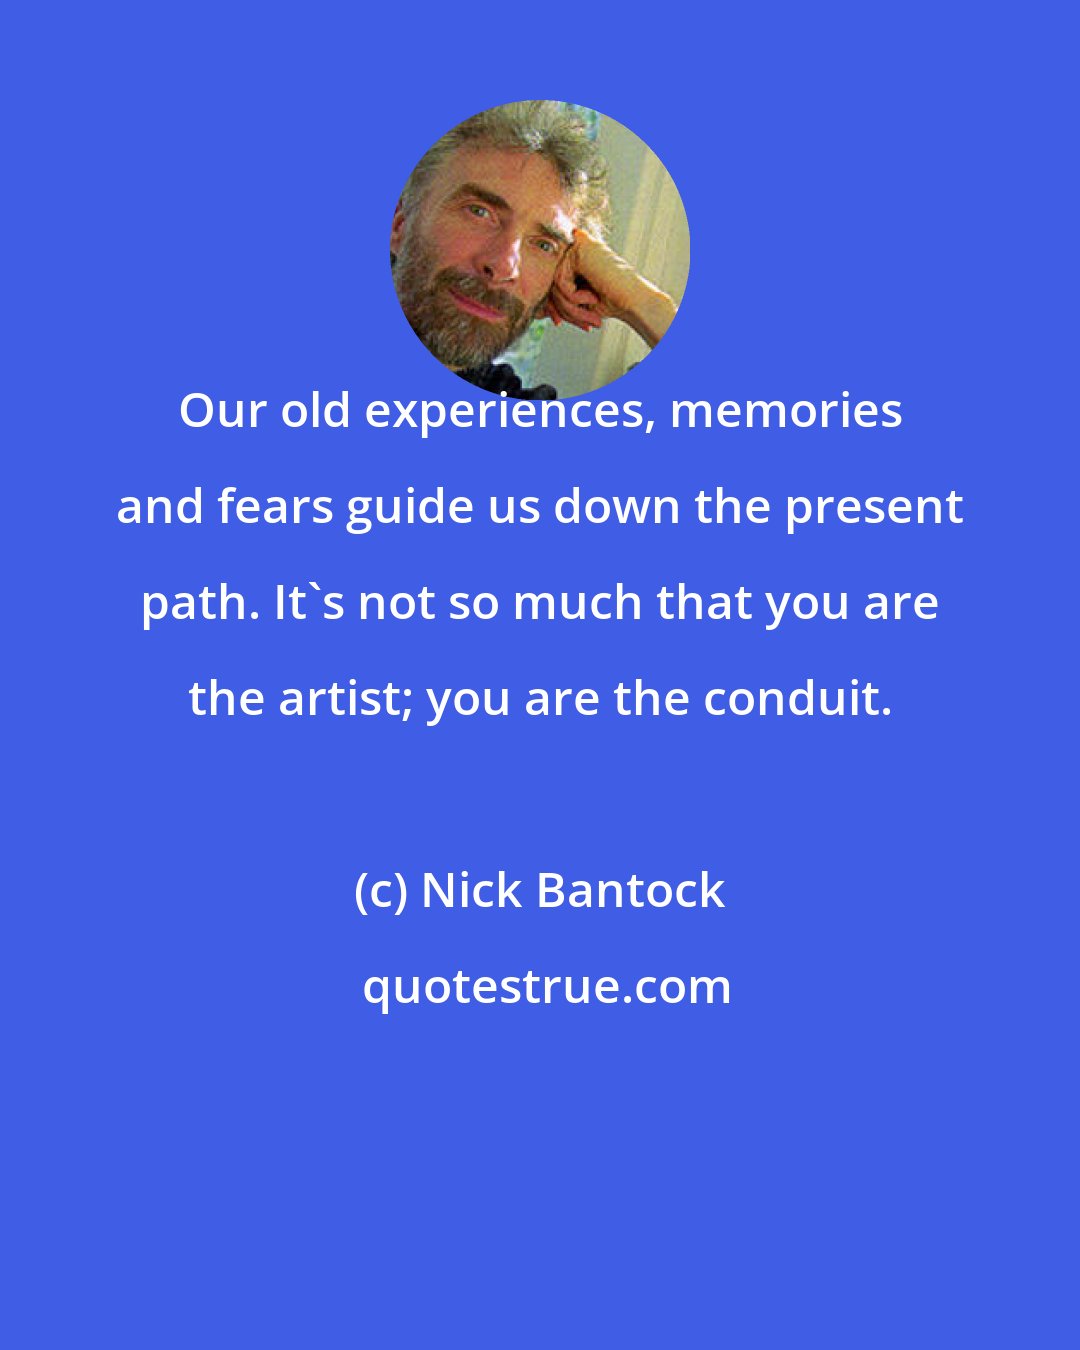 Nick Bantock: Our old experiences, memories and fears guide us down the present path. It's not so much that you are the artist; you are the conduit.